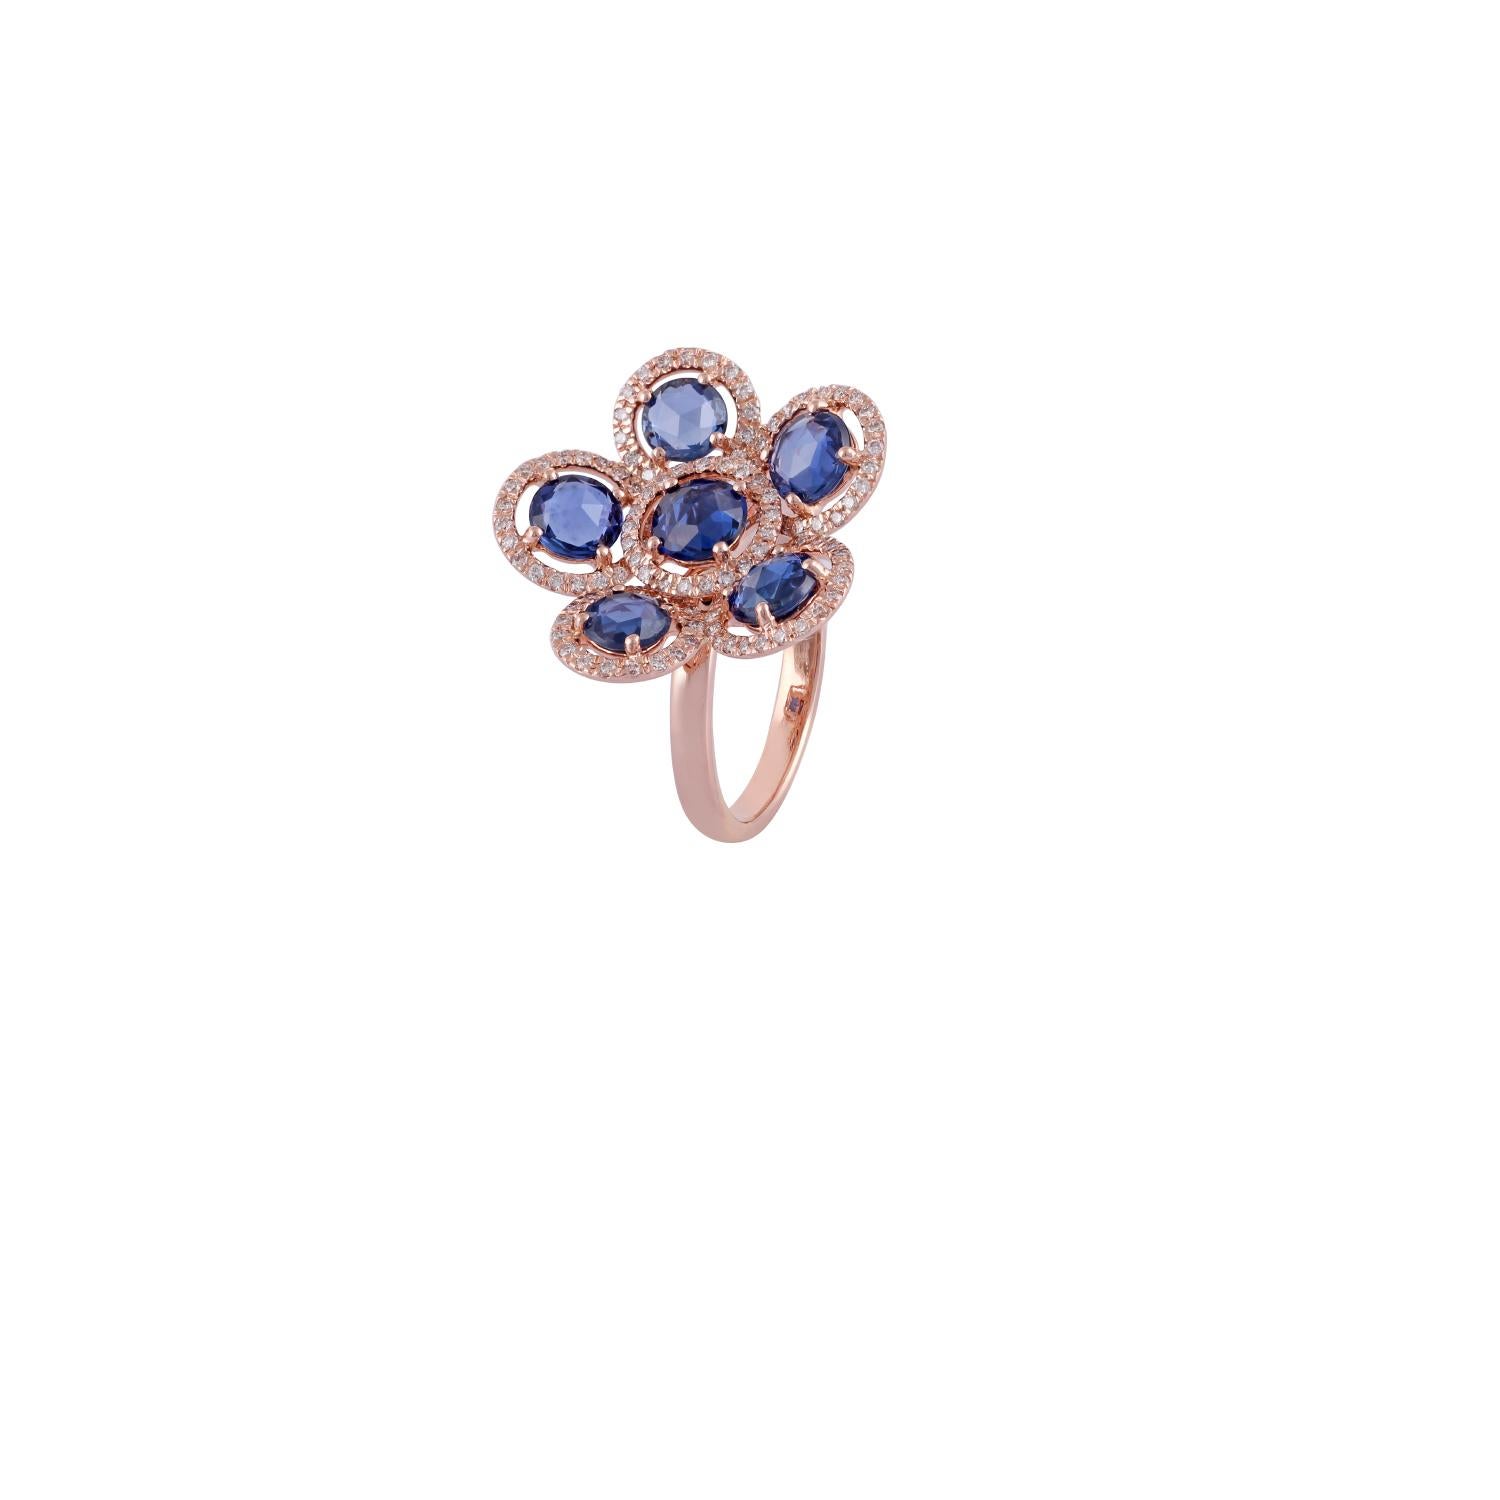 Contemporary Sapphire and Diamond Ring Studded in 18 Karat Rose Gold